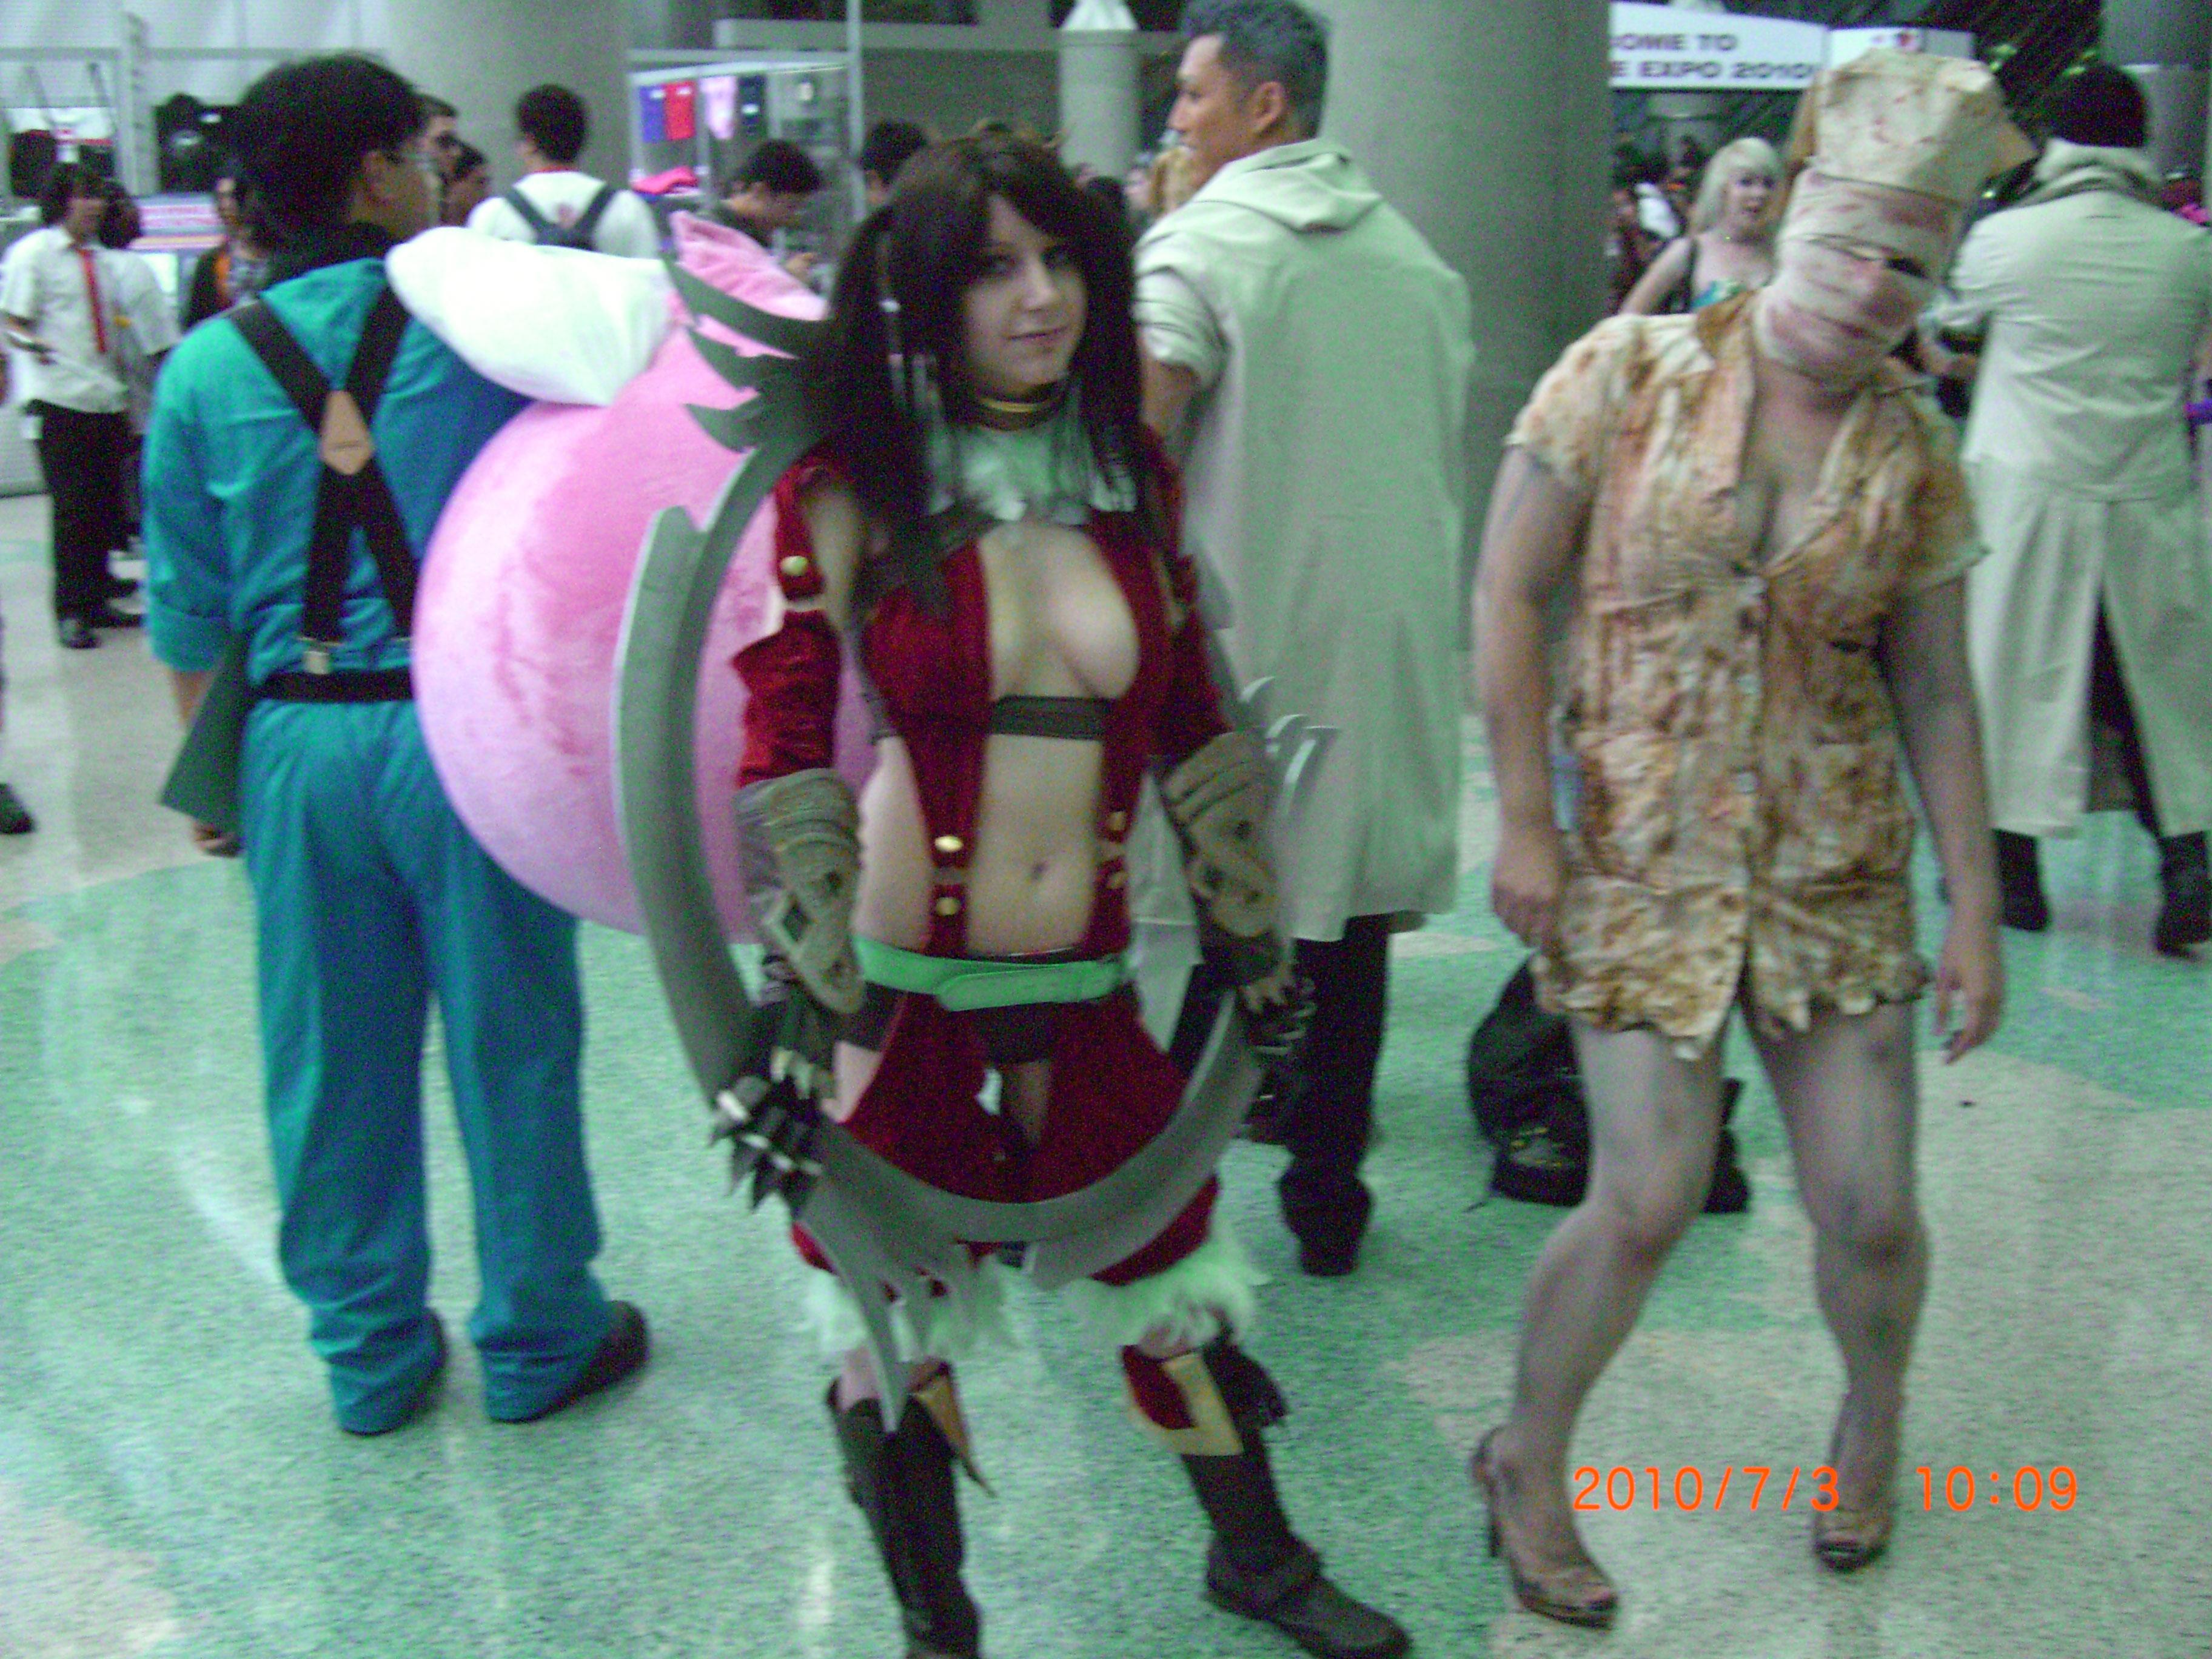 Cosplay convention sex